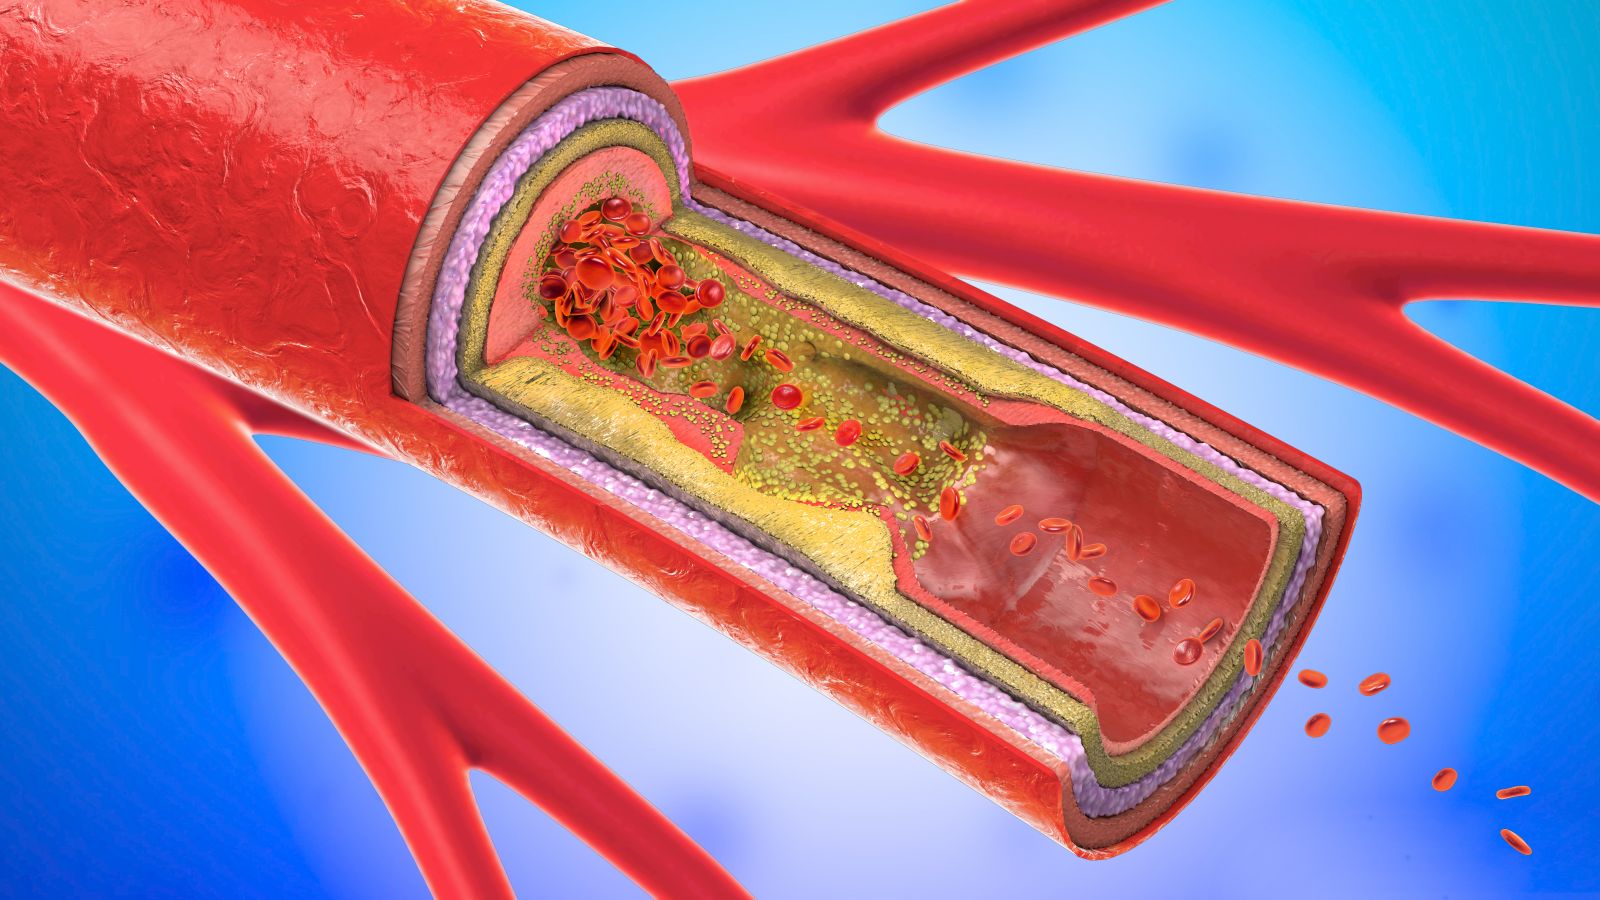 Know about carotid artery location & carotid artery testing with Access Health Care Physicians in Florida.